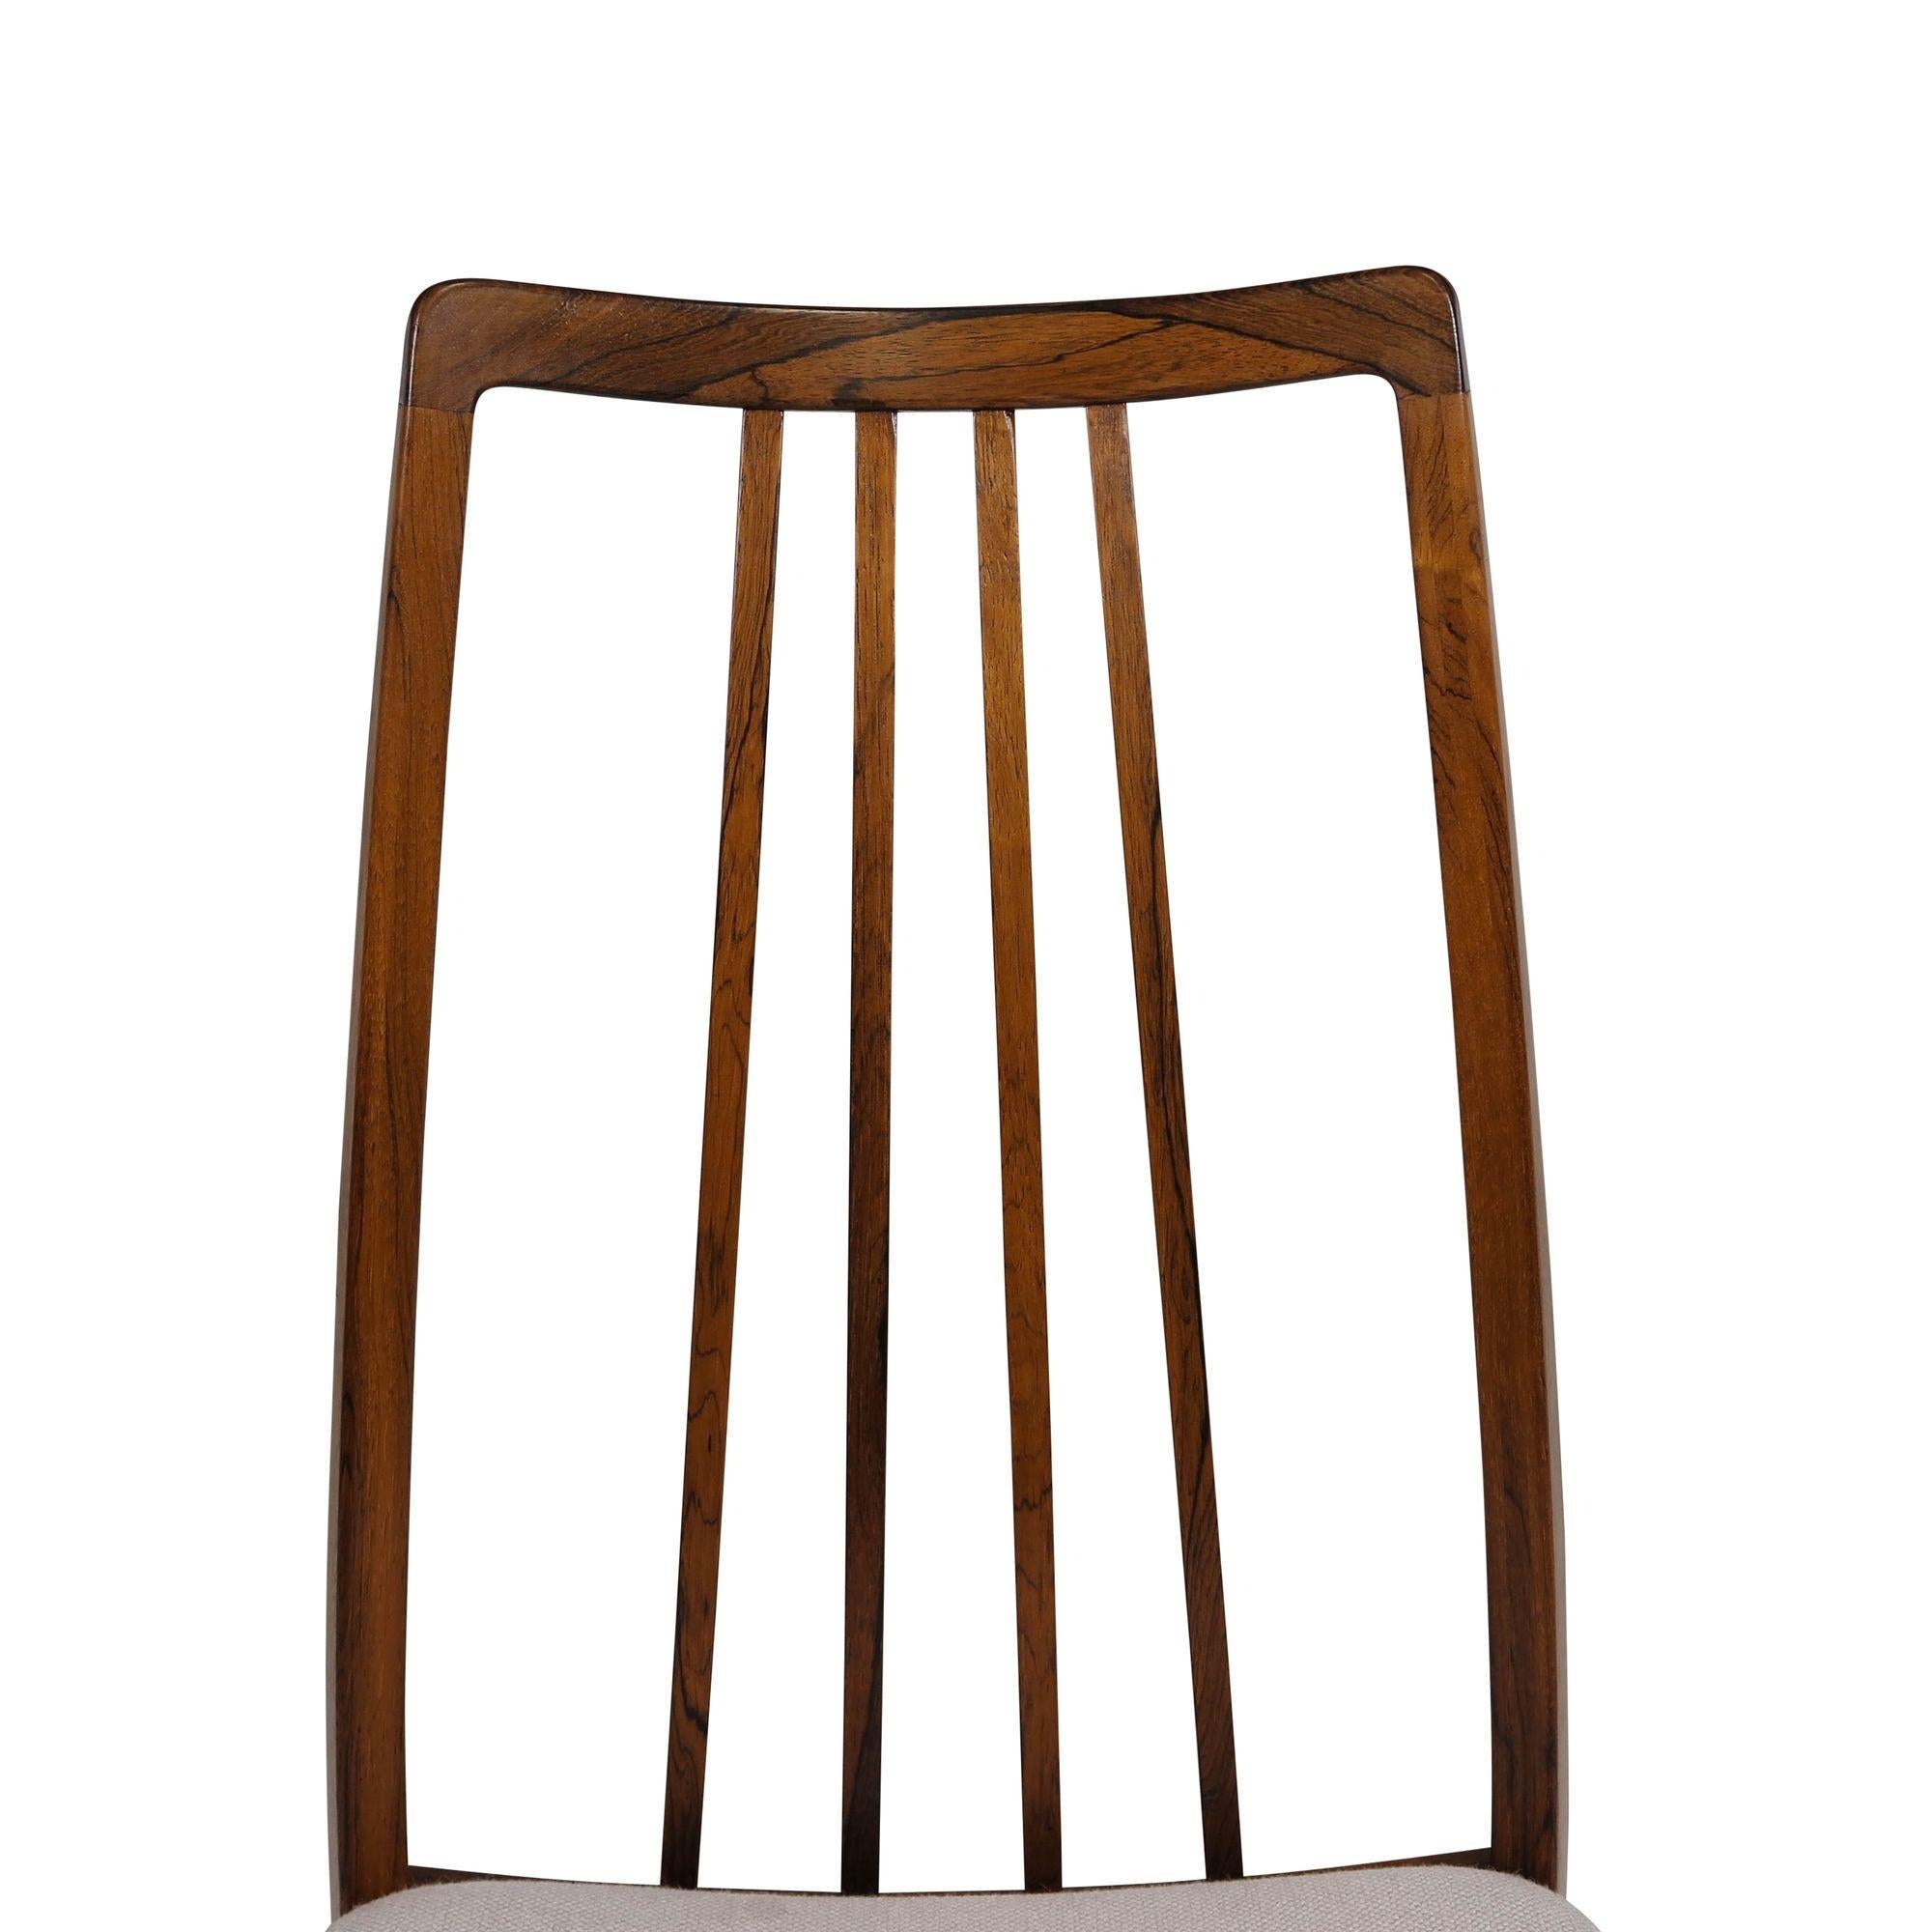 Six Danish Rosewood Dining Chairs In Excellent Condition For Sale In Oakland, CA